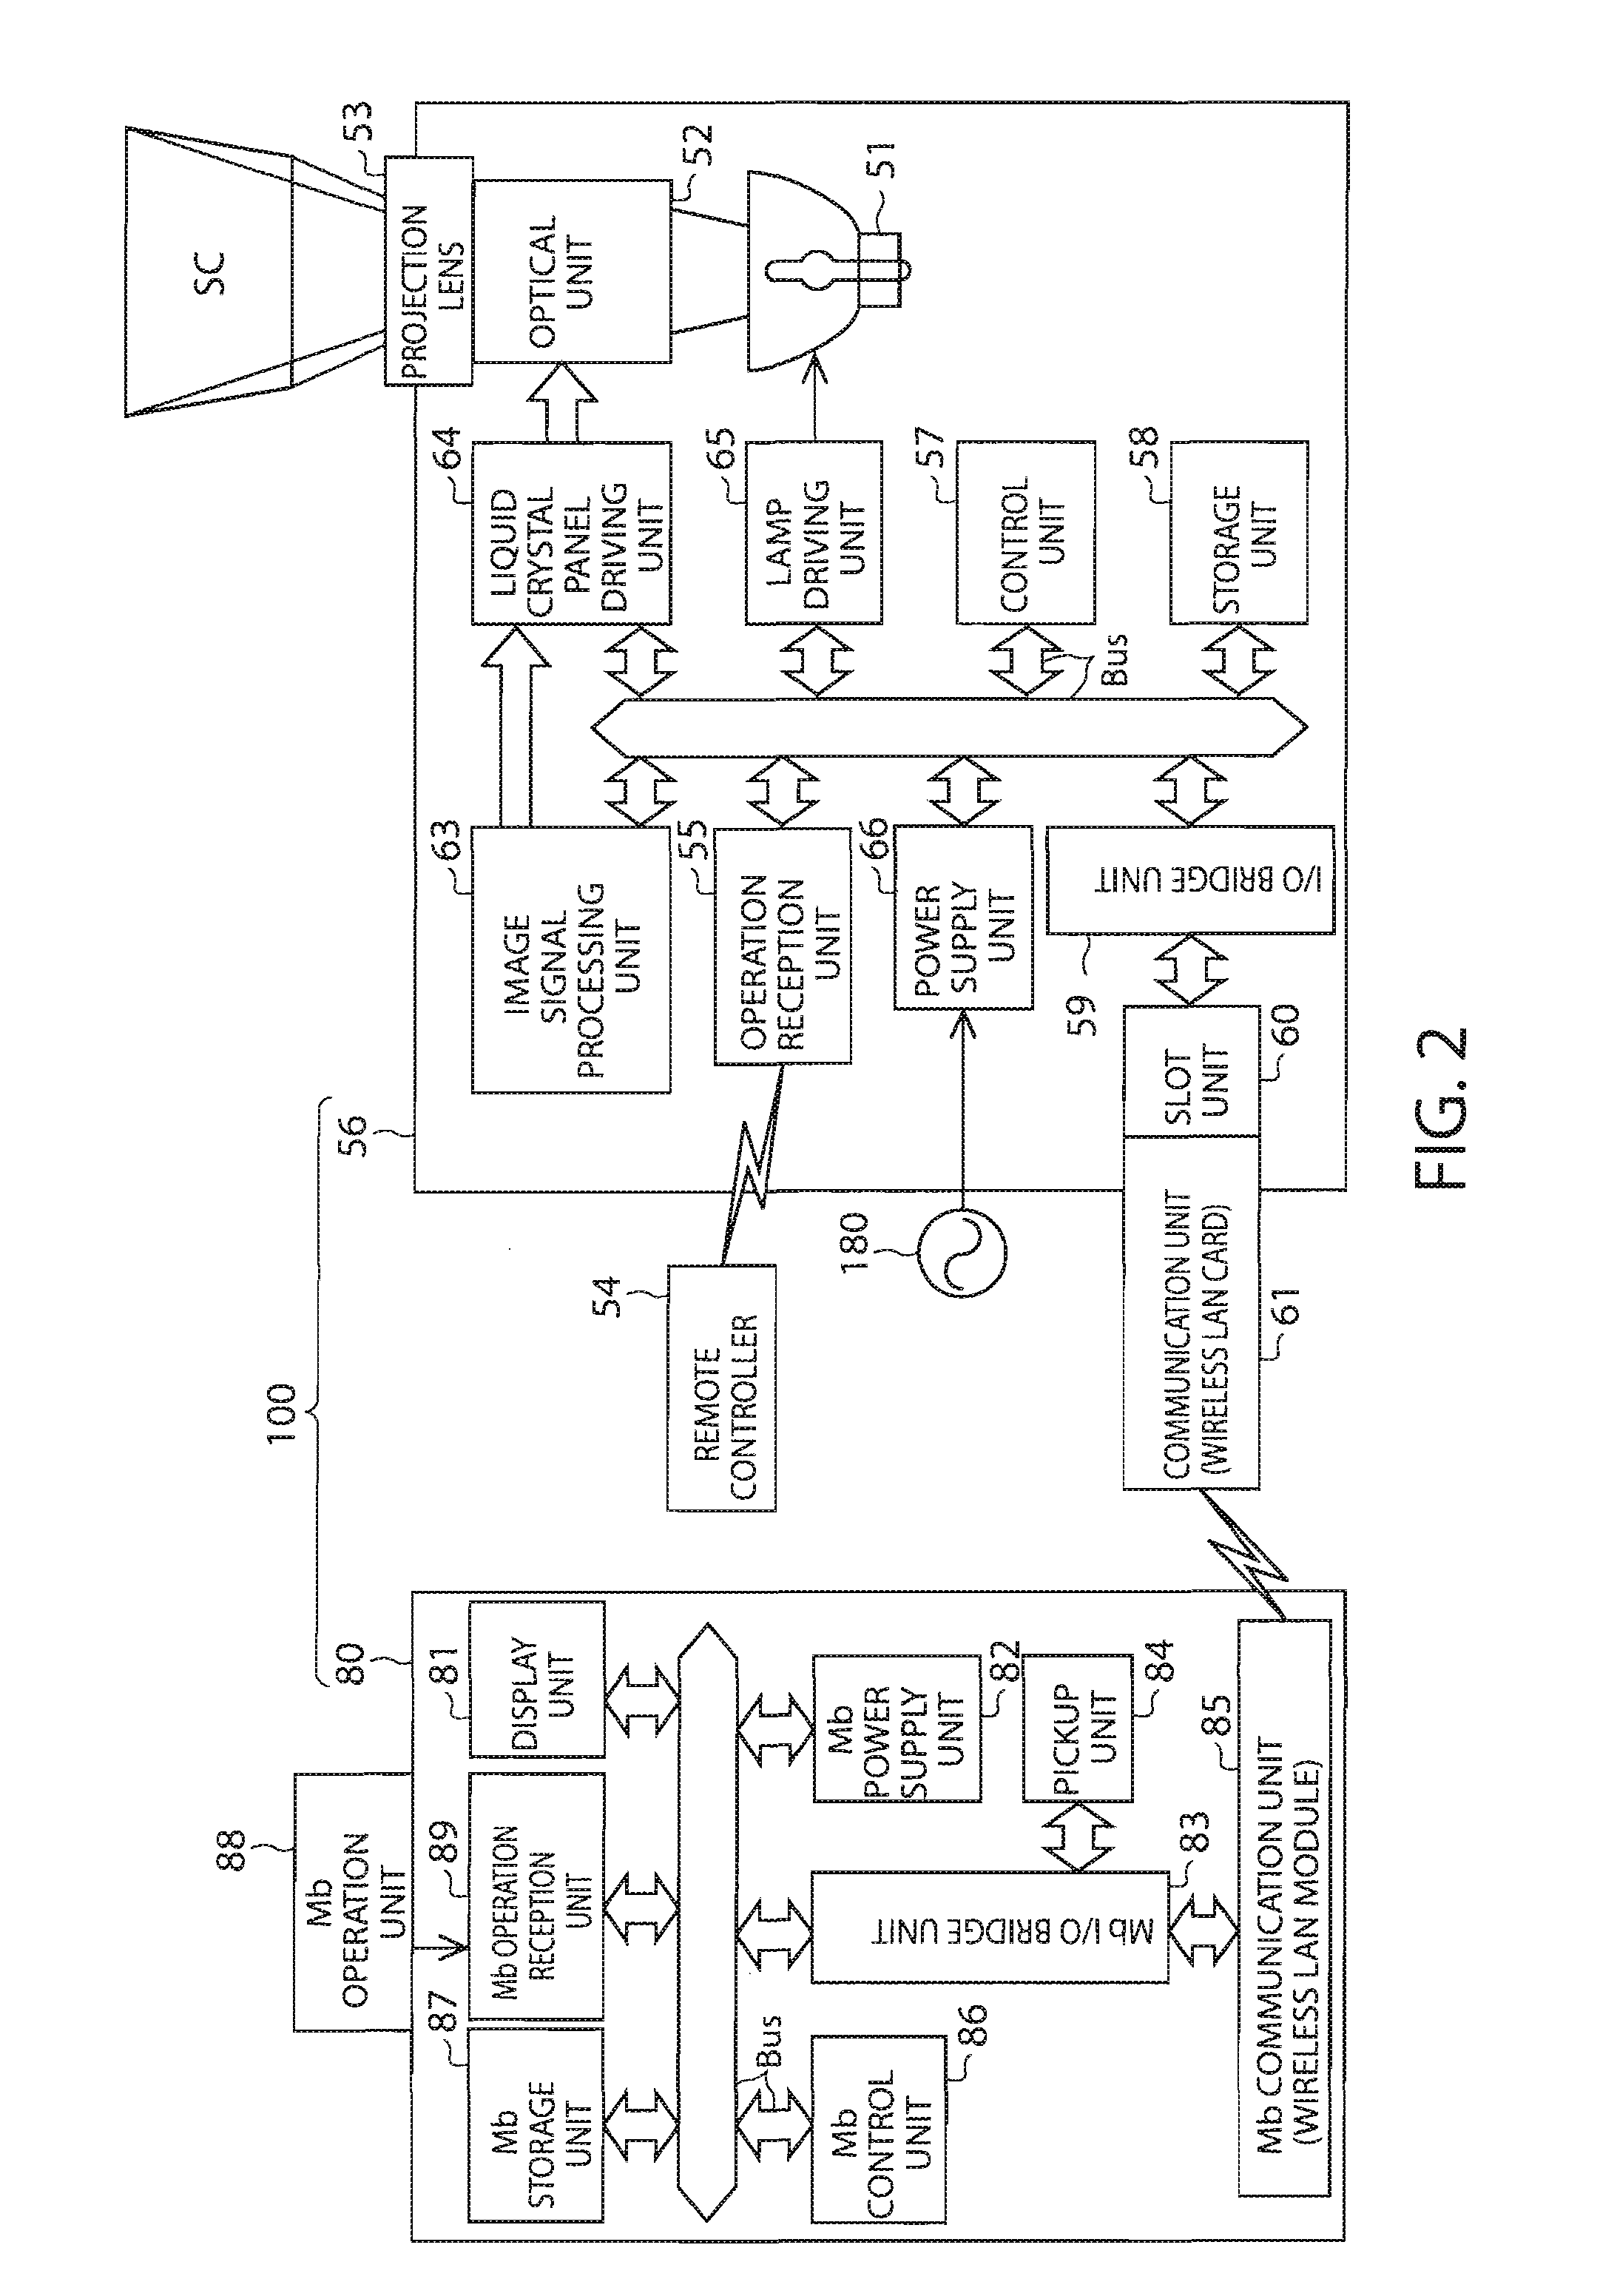 Image display system, image display device of image display system, mobile terminal device, connection establishment method of image display system